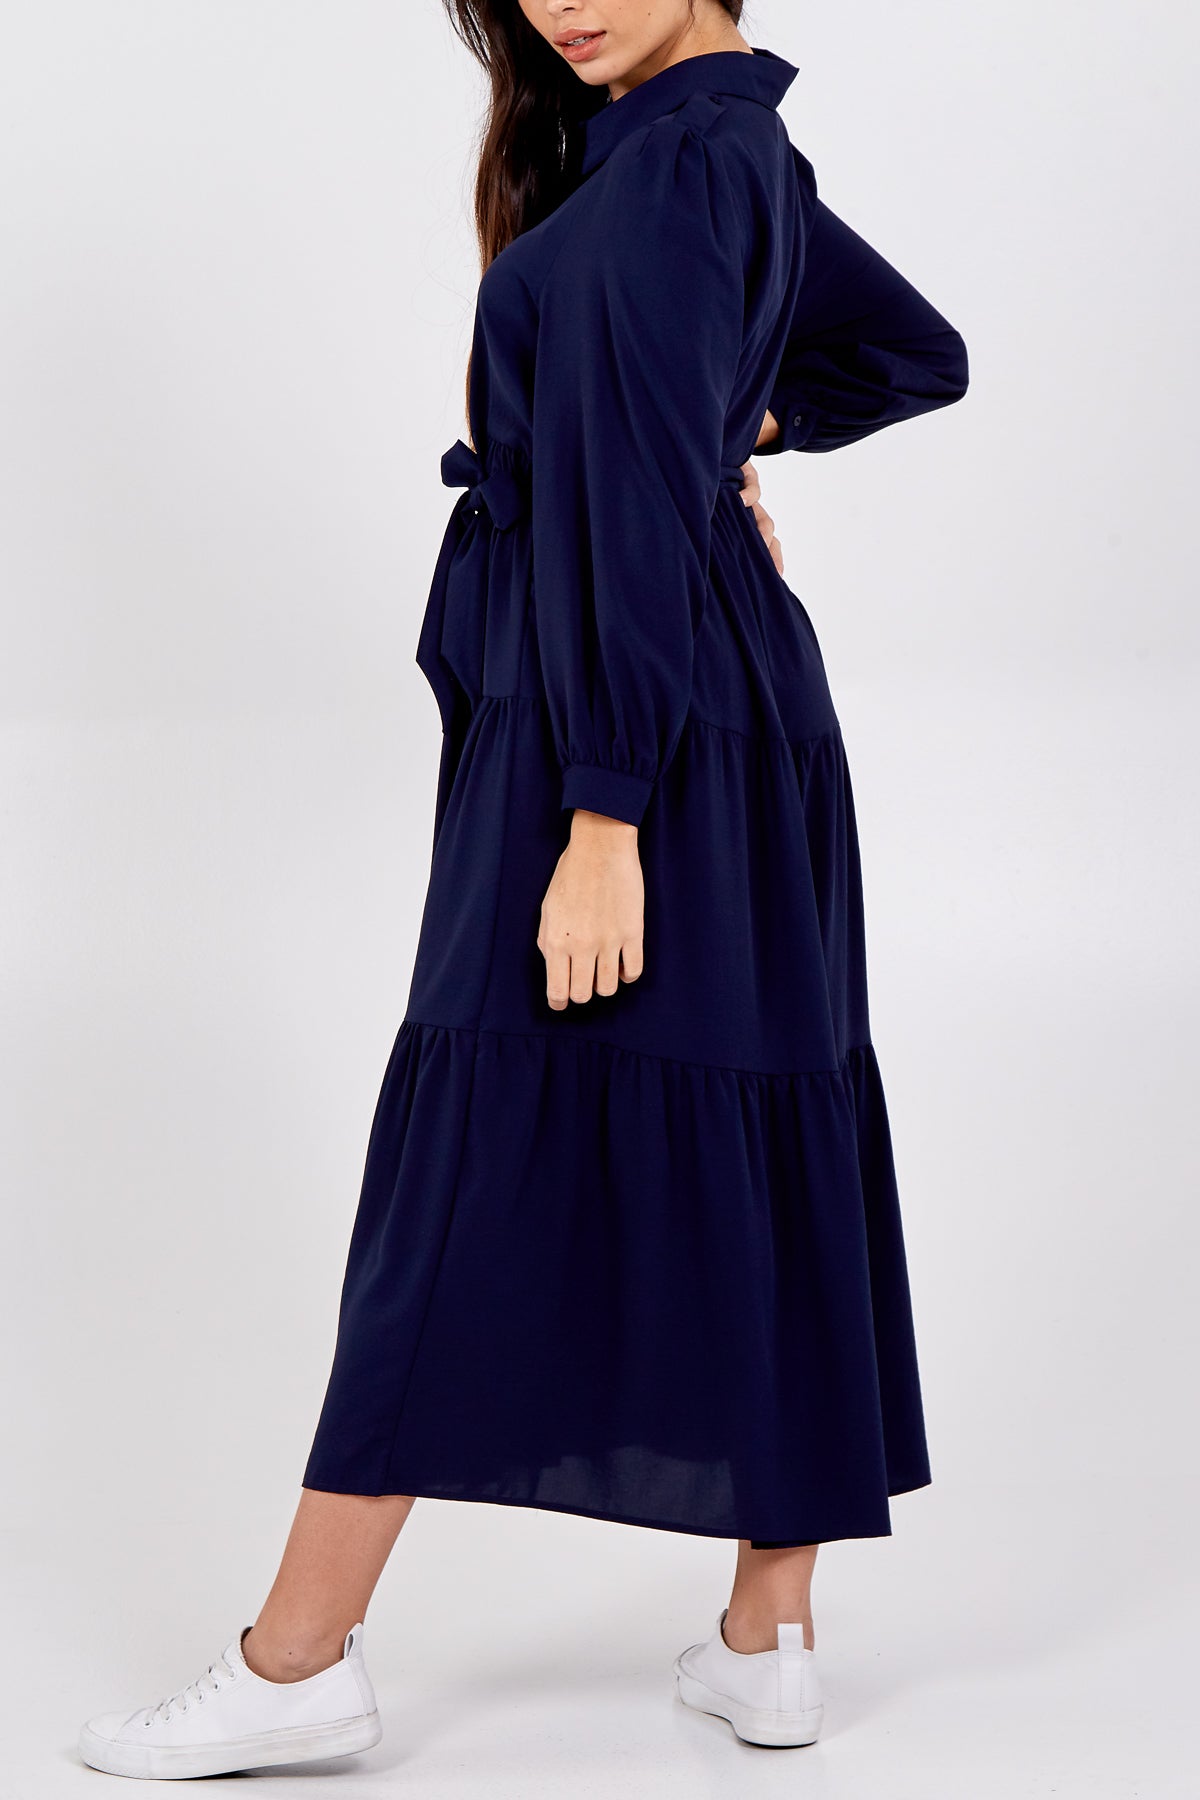 Long Tiered Collar Dress With Belt